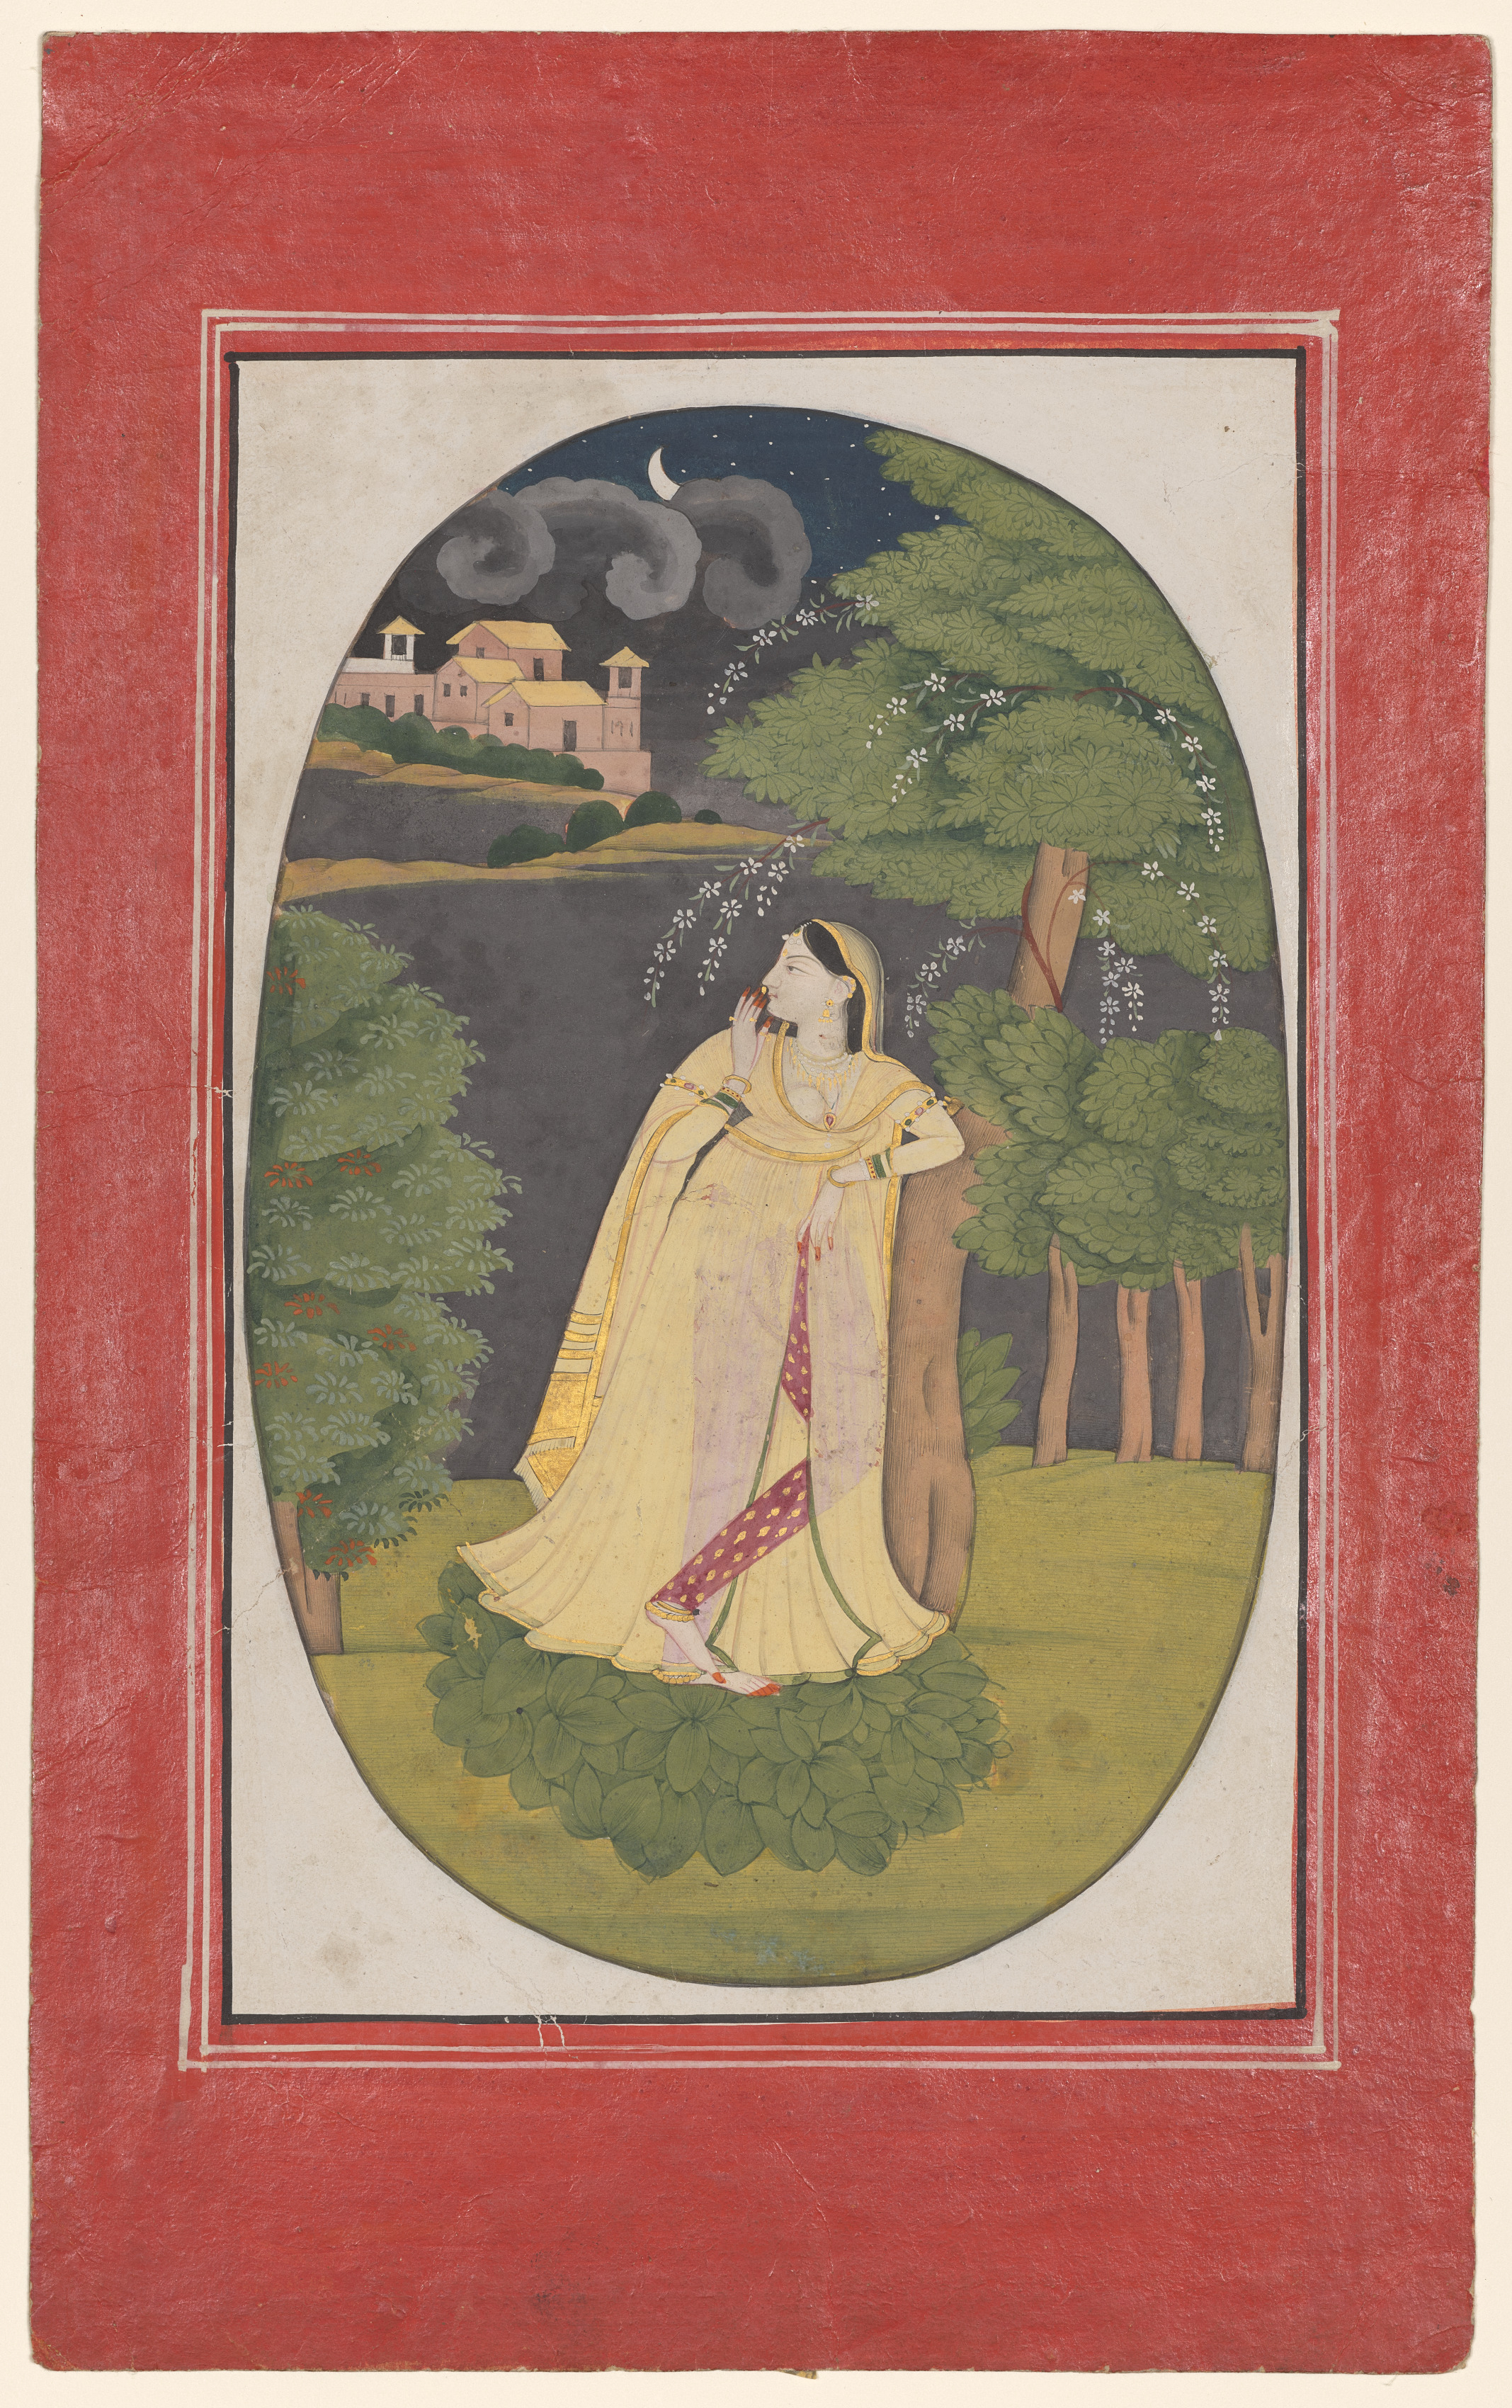 The Heroine Who Waits Anxiously for Her Absent Lover (Utka Nayika)